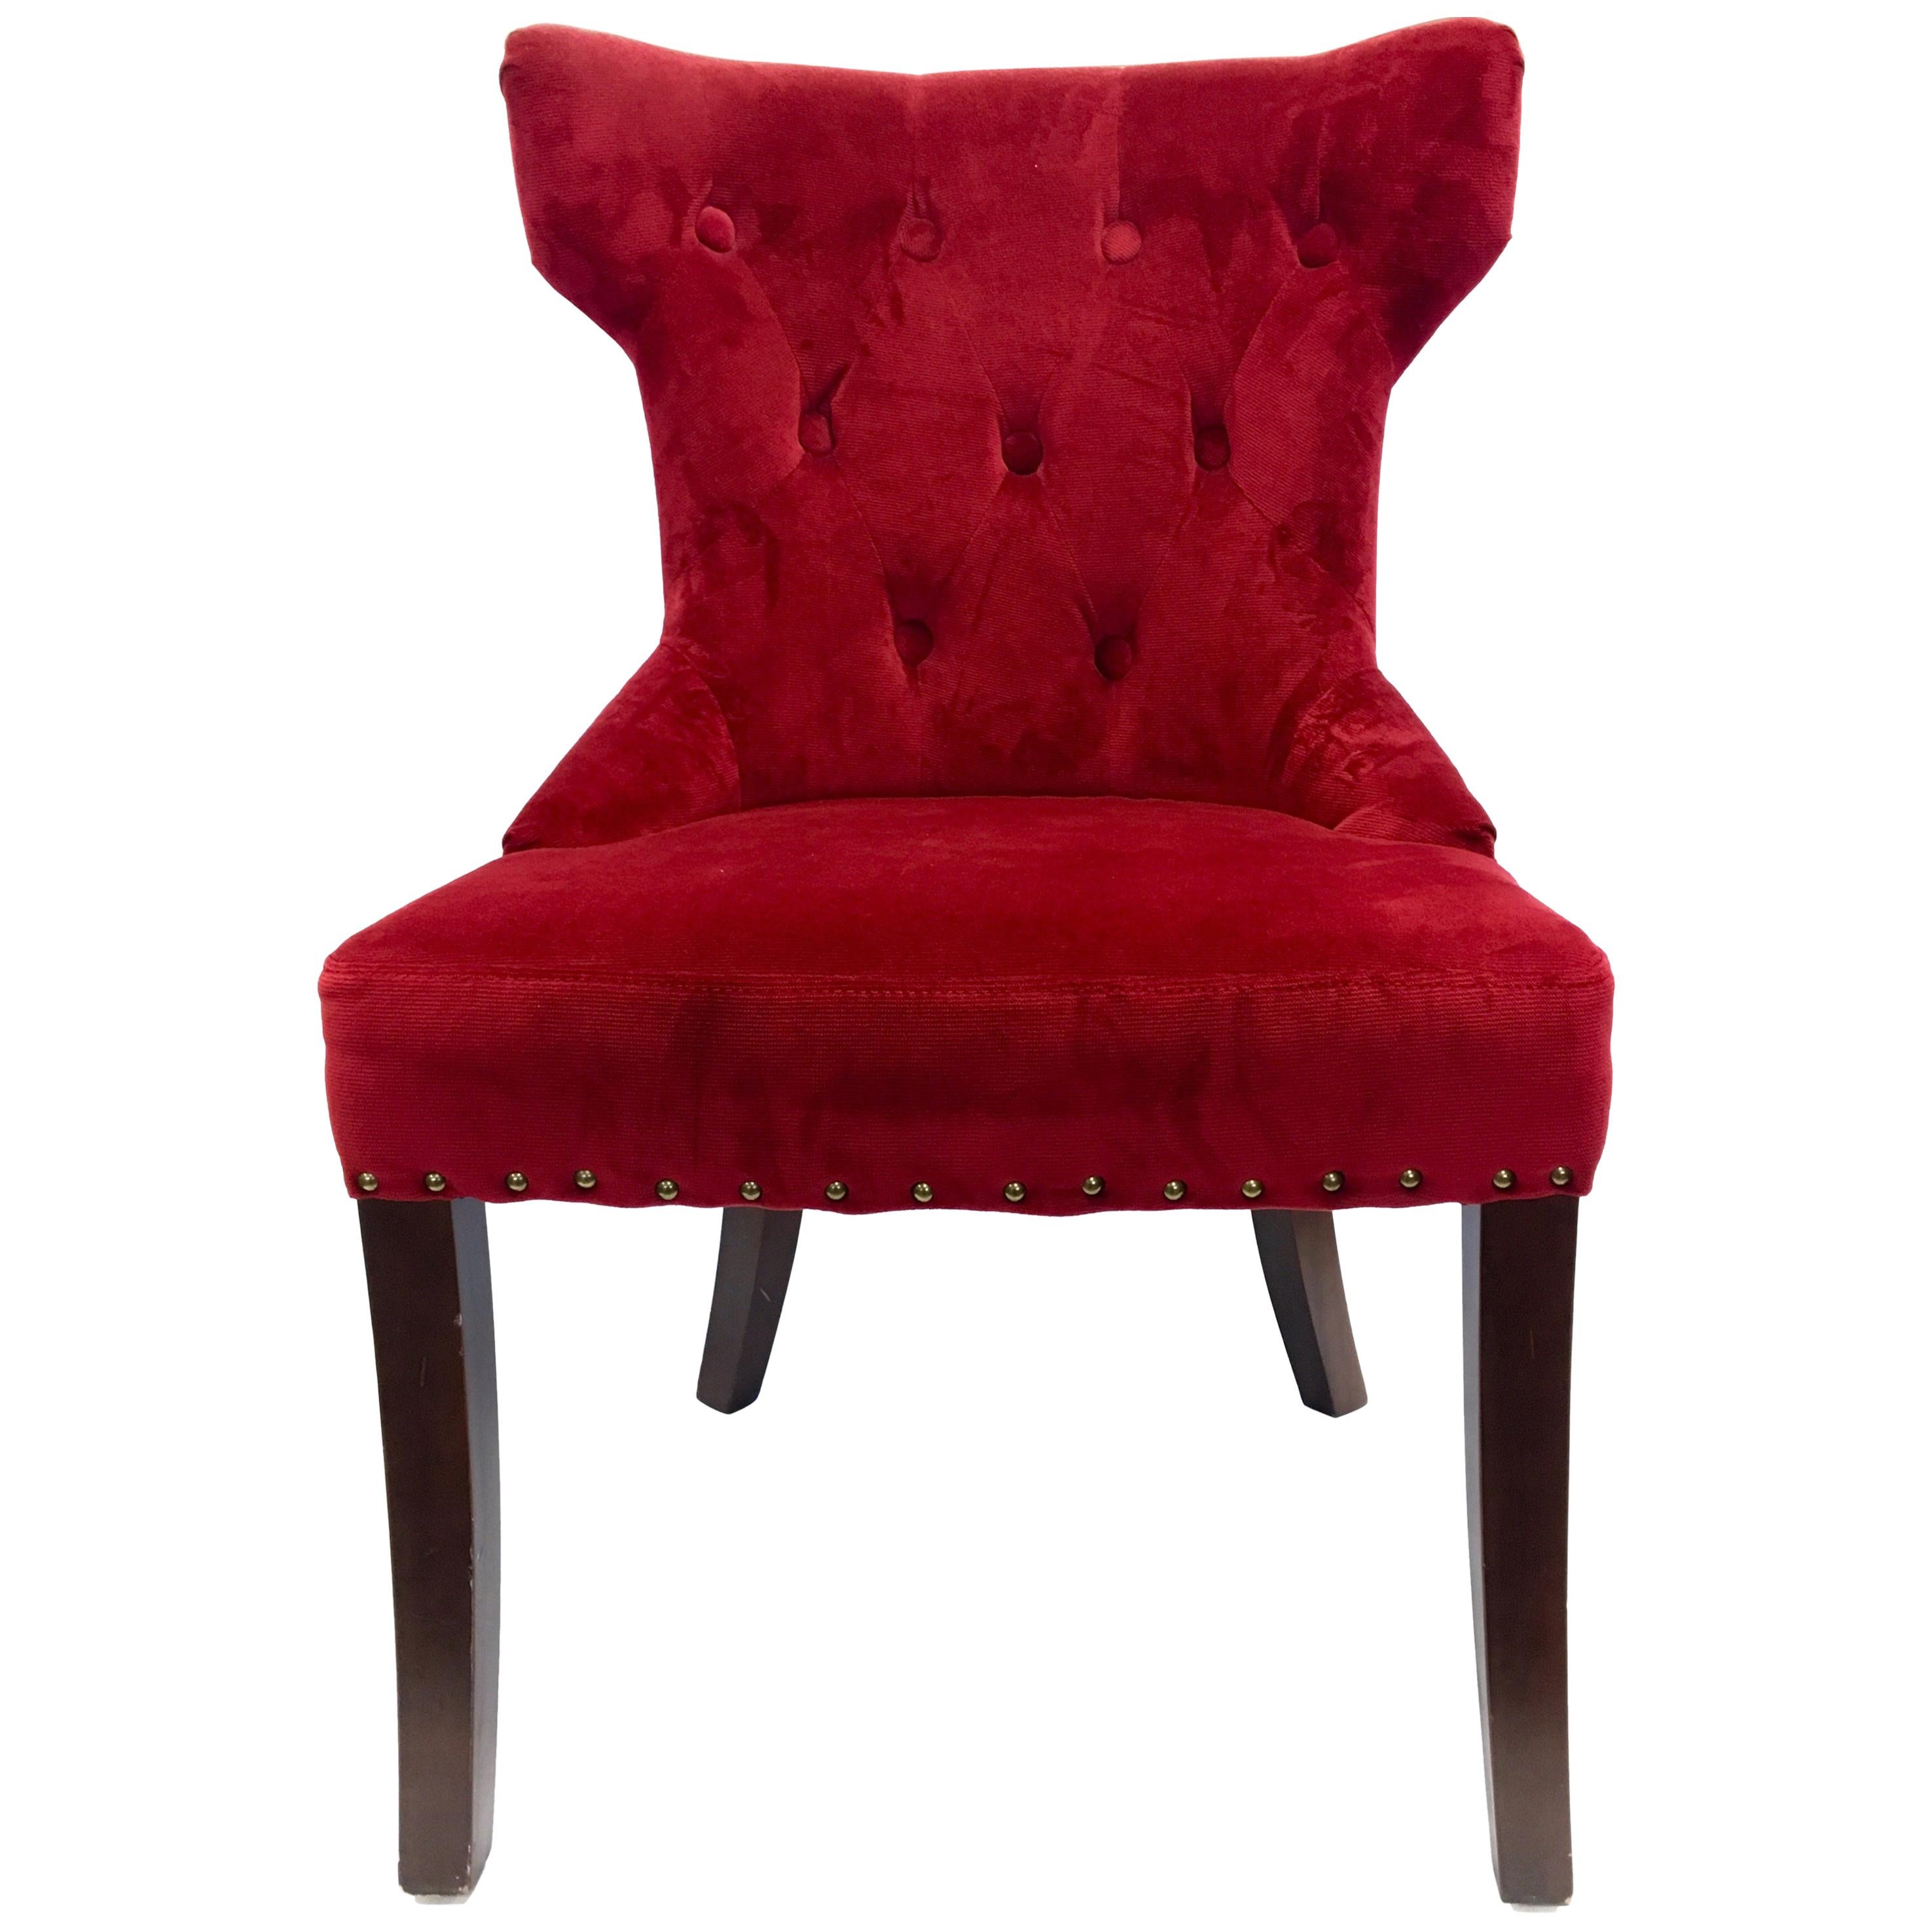 Custom Upholstered Nailhead Red Tufted Dining Chair